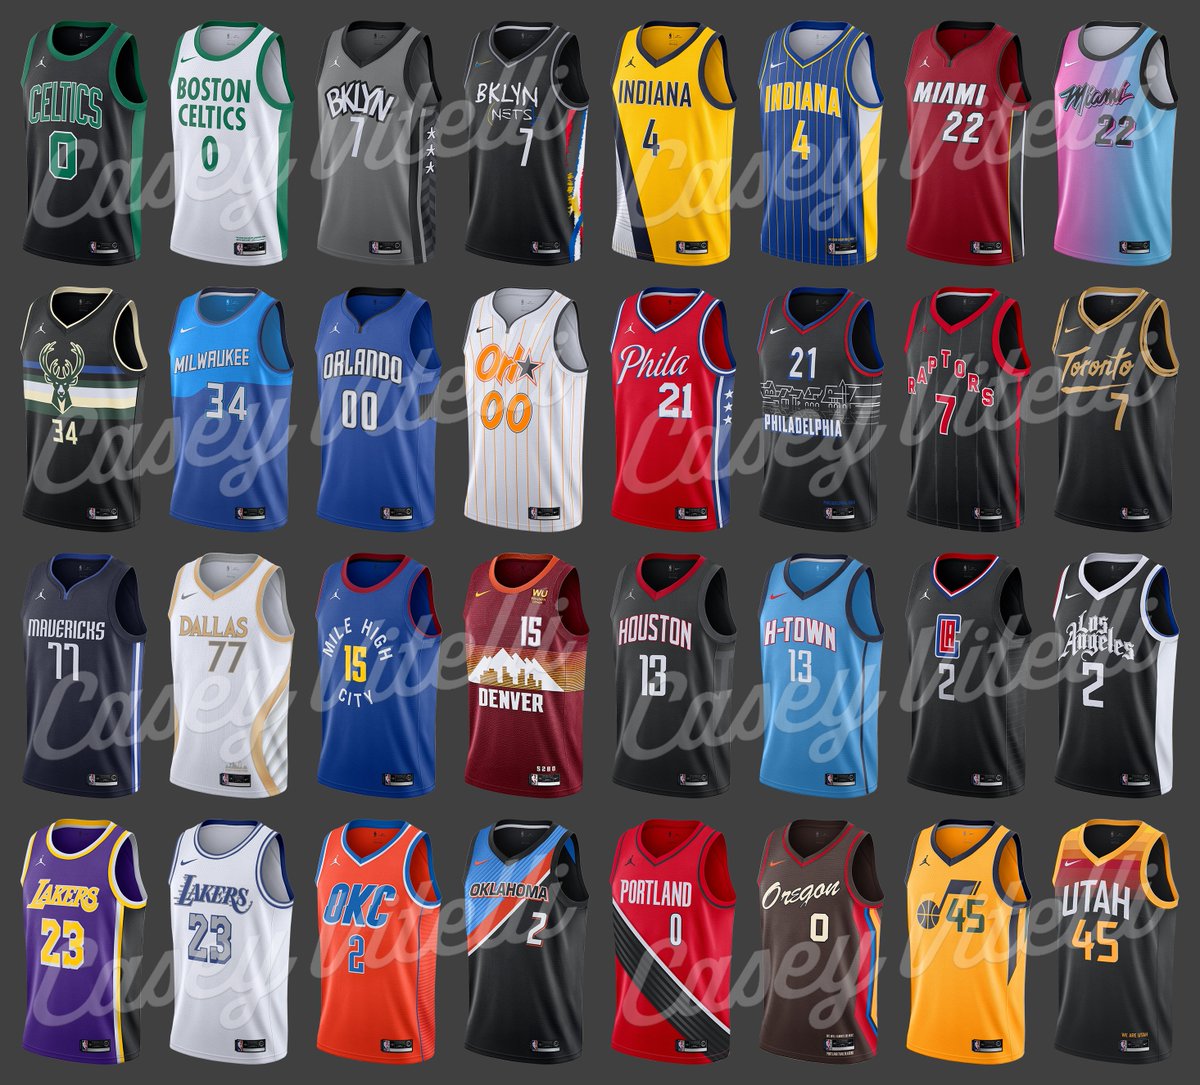 It looks like those NBA Earned Jersey Concepts that leaked back in